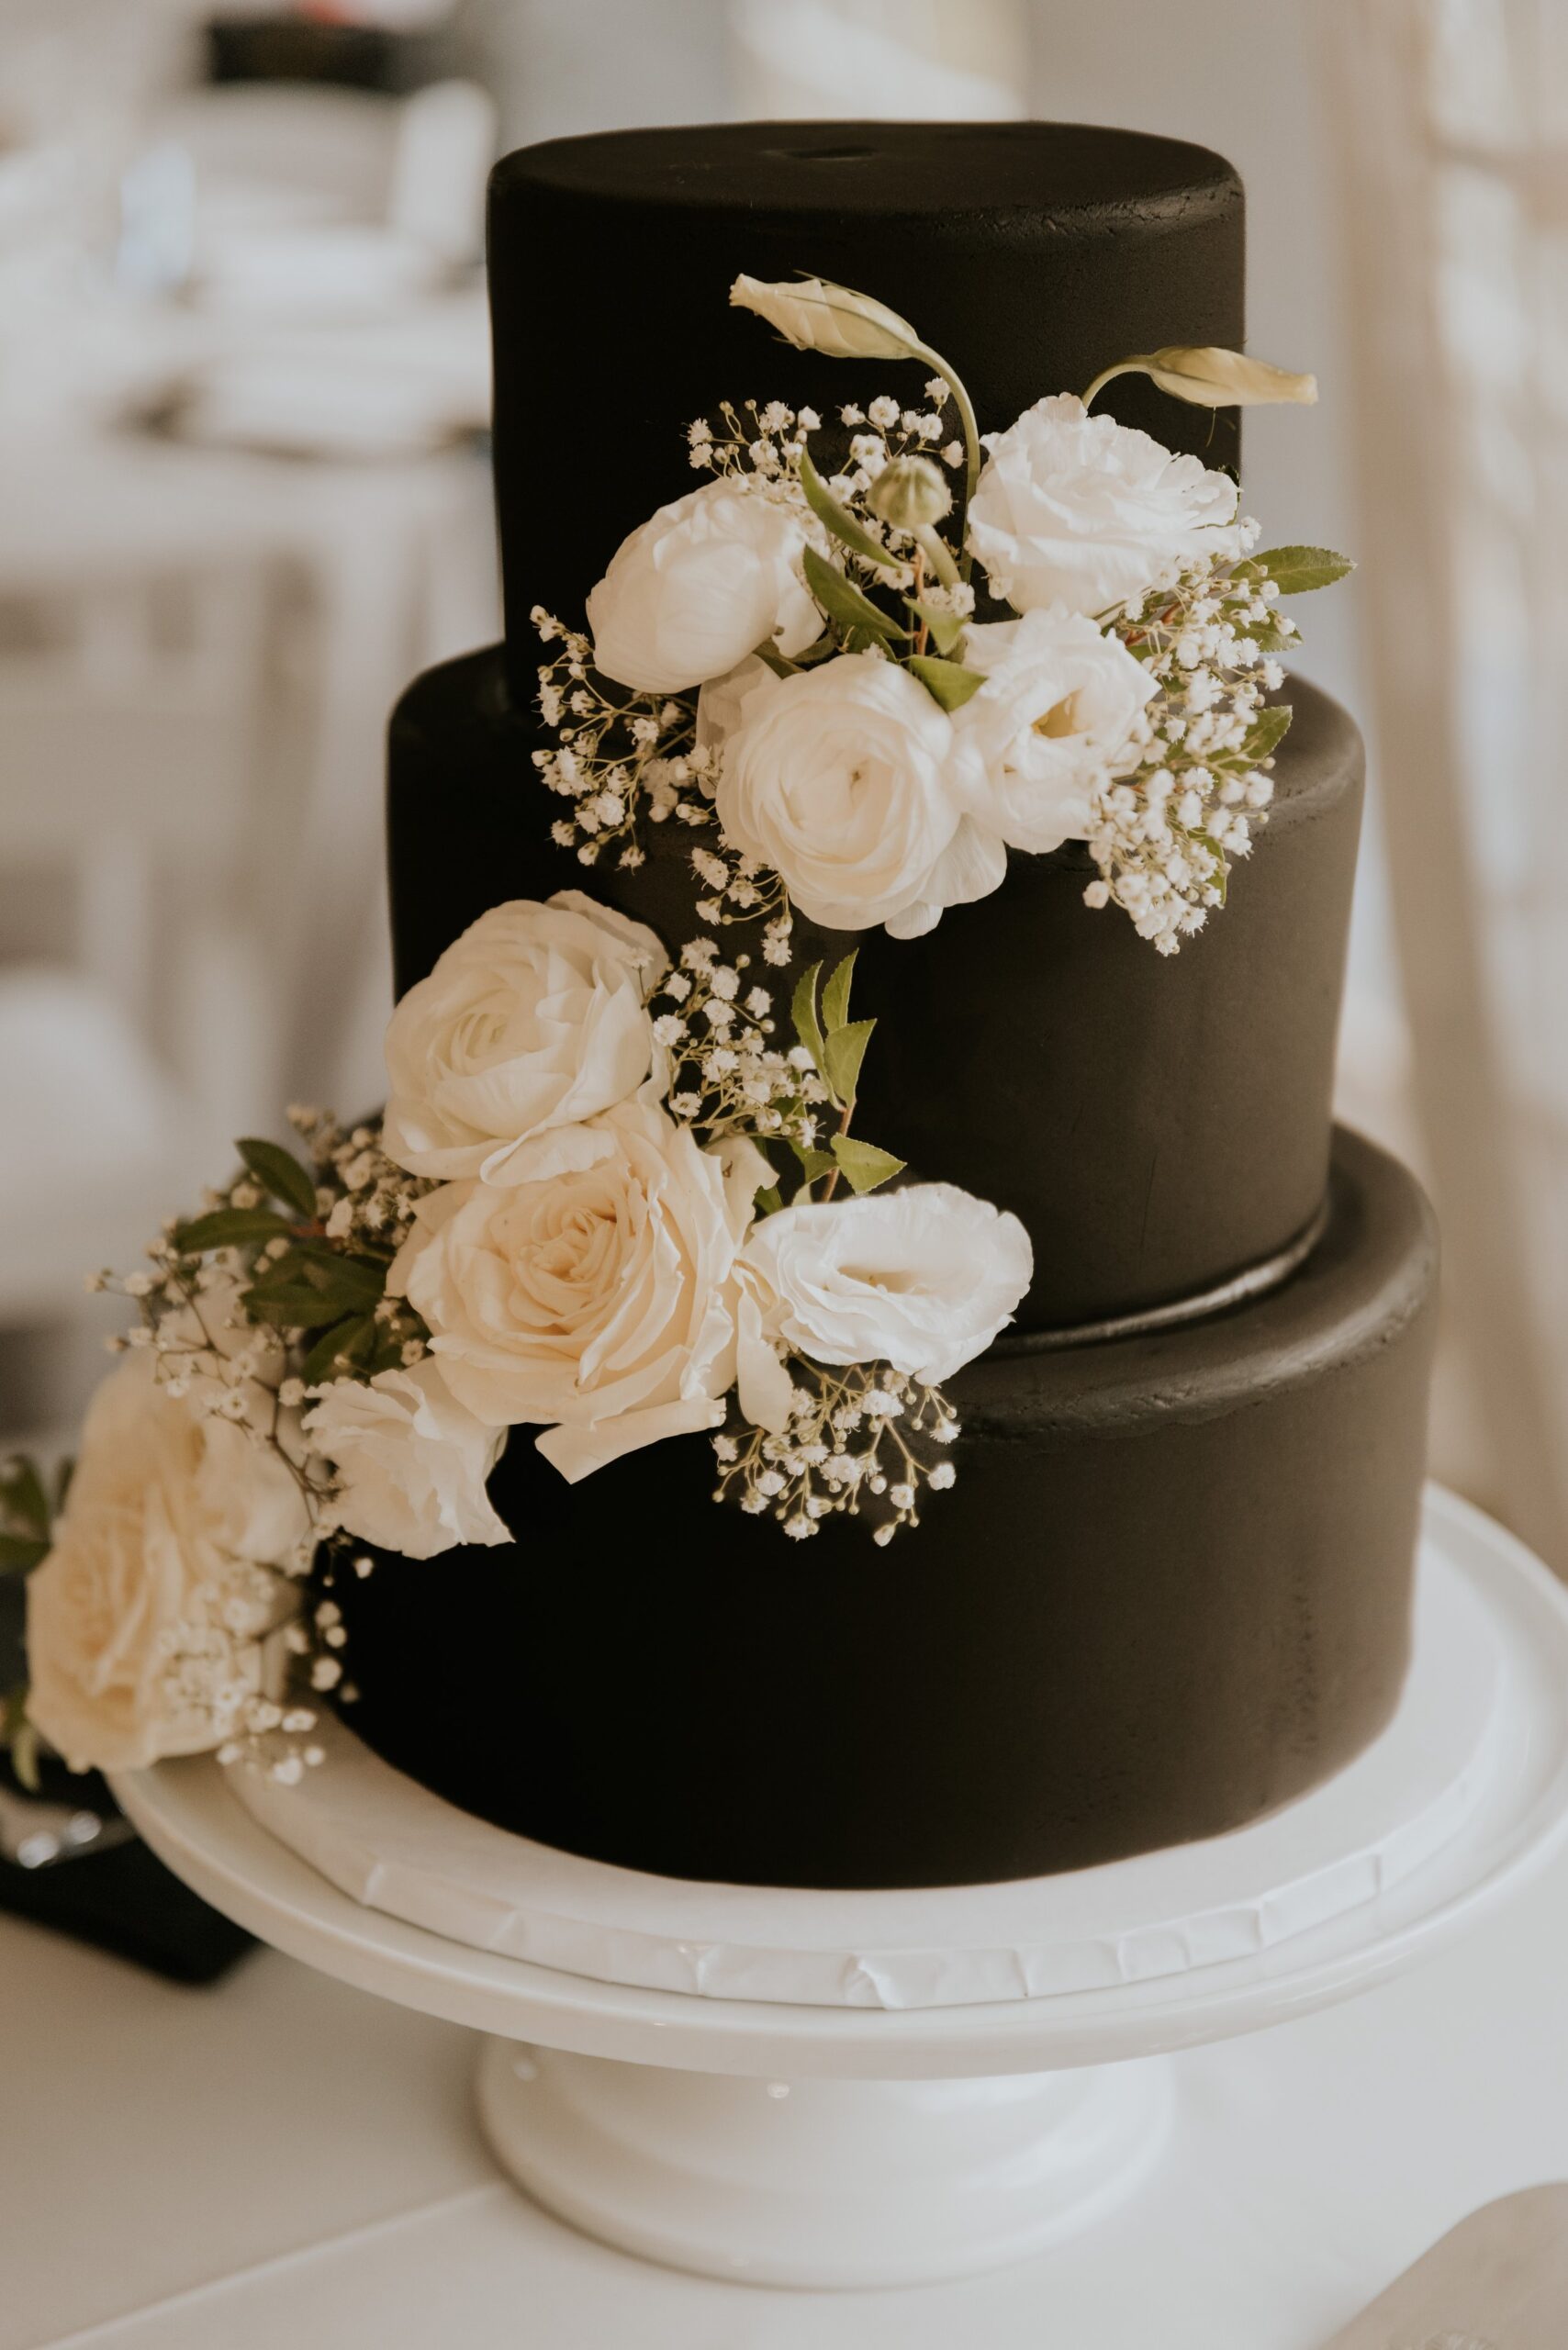 Emmy & Dick's Chic, Sophisticated Black-Tie Vail Wedding